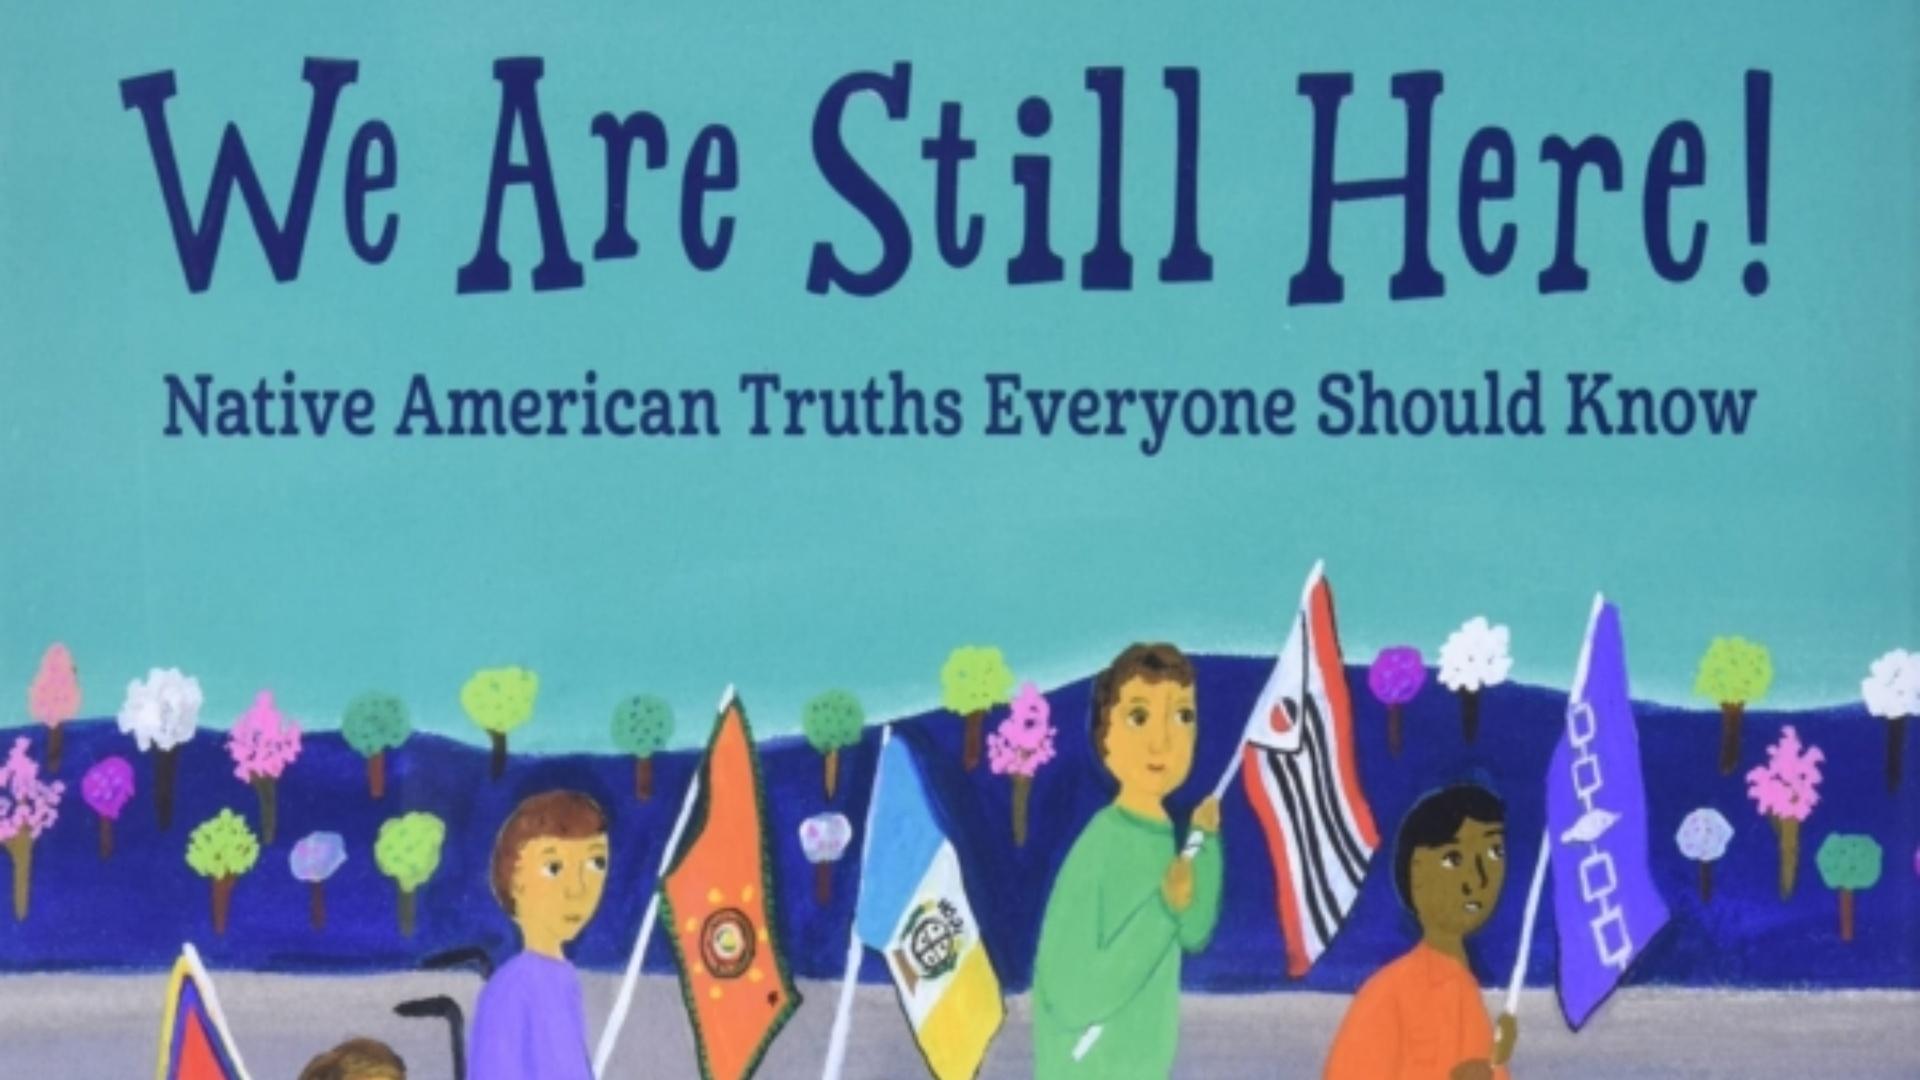 Book cover art of "We Are Still Here! Native American Truths Everyone Should Know"